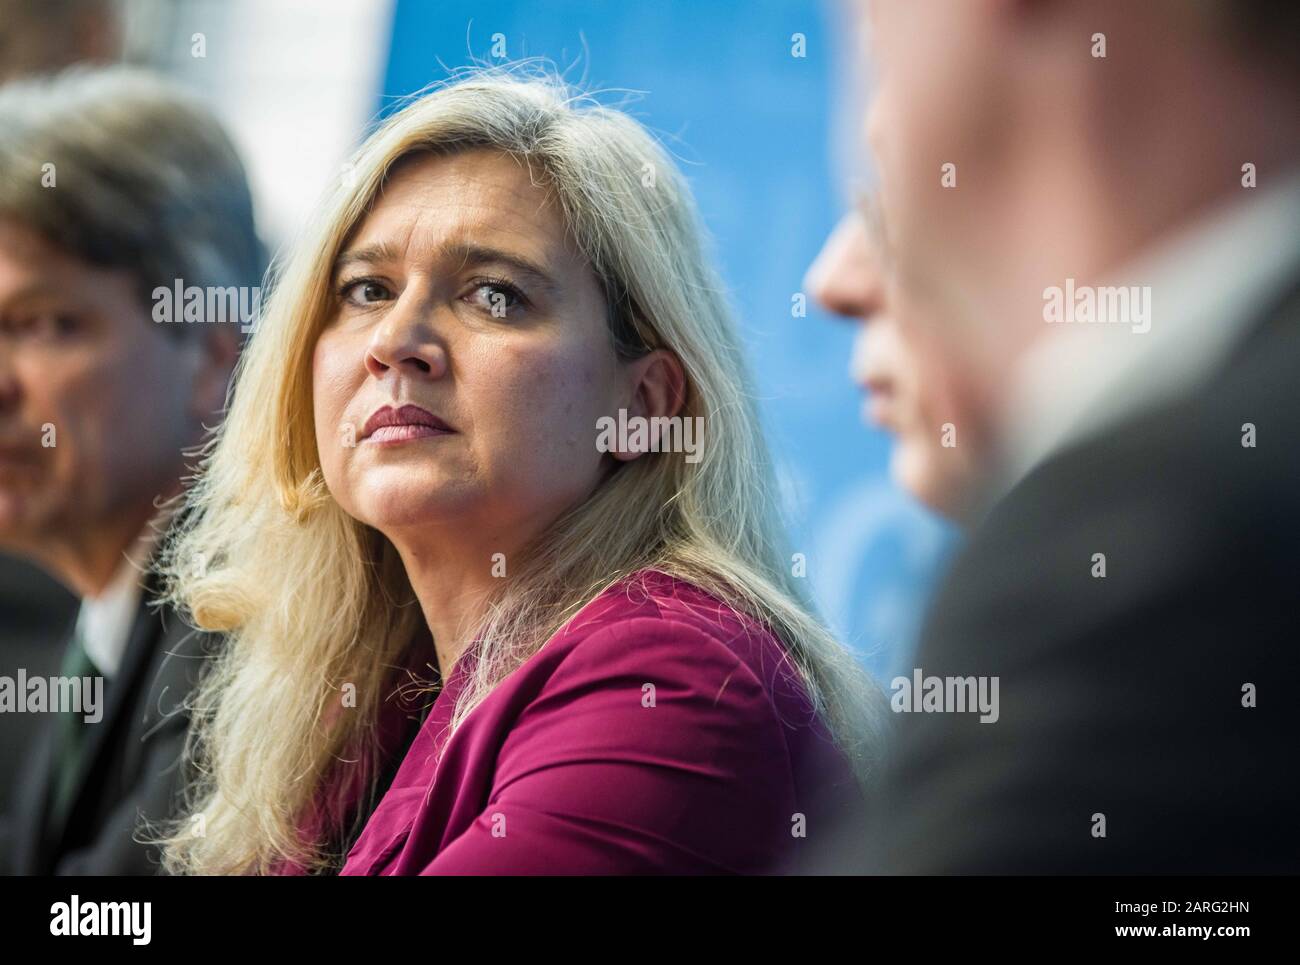 January 28, 2020, Munich, Bavaria, Germany: MELANIE HUML, physician and Minister of the Bavarian Landtag.  In connection with the first confirmed case of Corona Virus in Germany, the Bavarian Health Ministry (Bayerisches Staatsministerium fuer Gesundheit und Pflege) held a press conference to discuss the findings. The virus was found in the wealthy Lake Starnberg area, just outside of western Munich, which is also connected to the citiy via its S-Bahn network.  The affected is a 33 year old from Landsberg, who works at a firm in Starnberg recently had contact with a Chinese employee in Germany Stock Photo